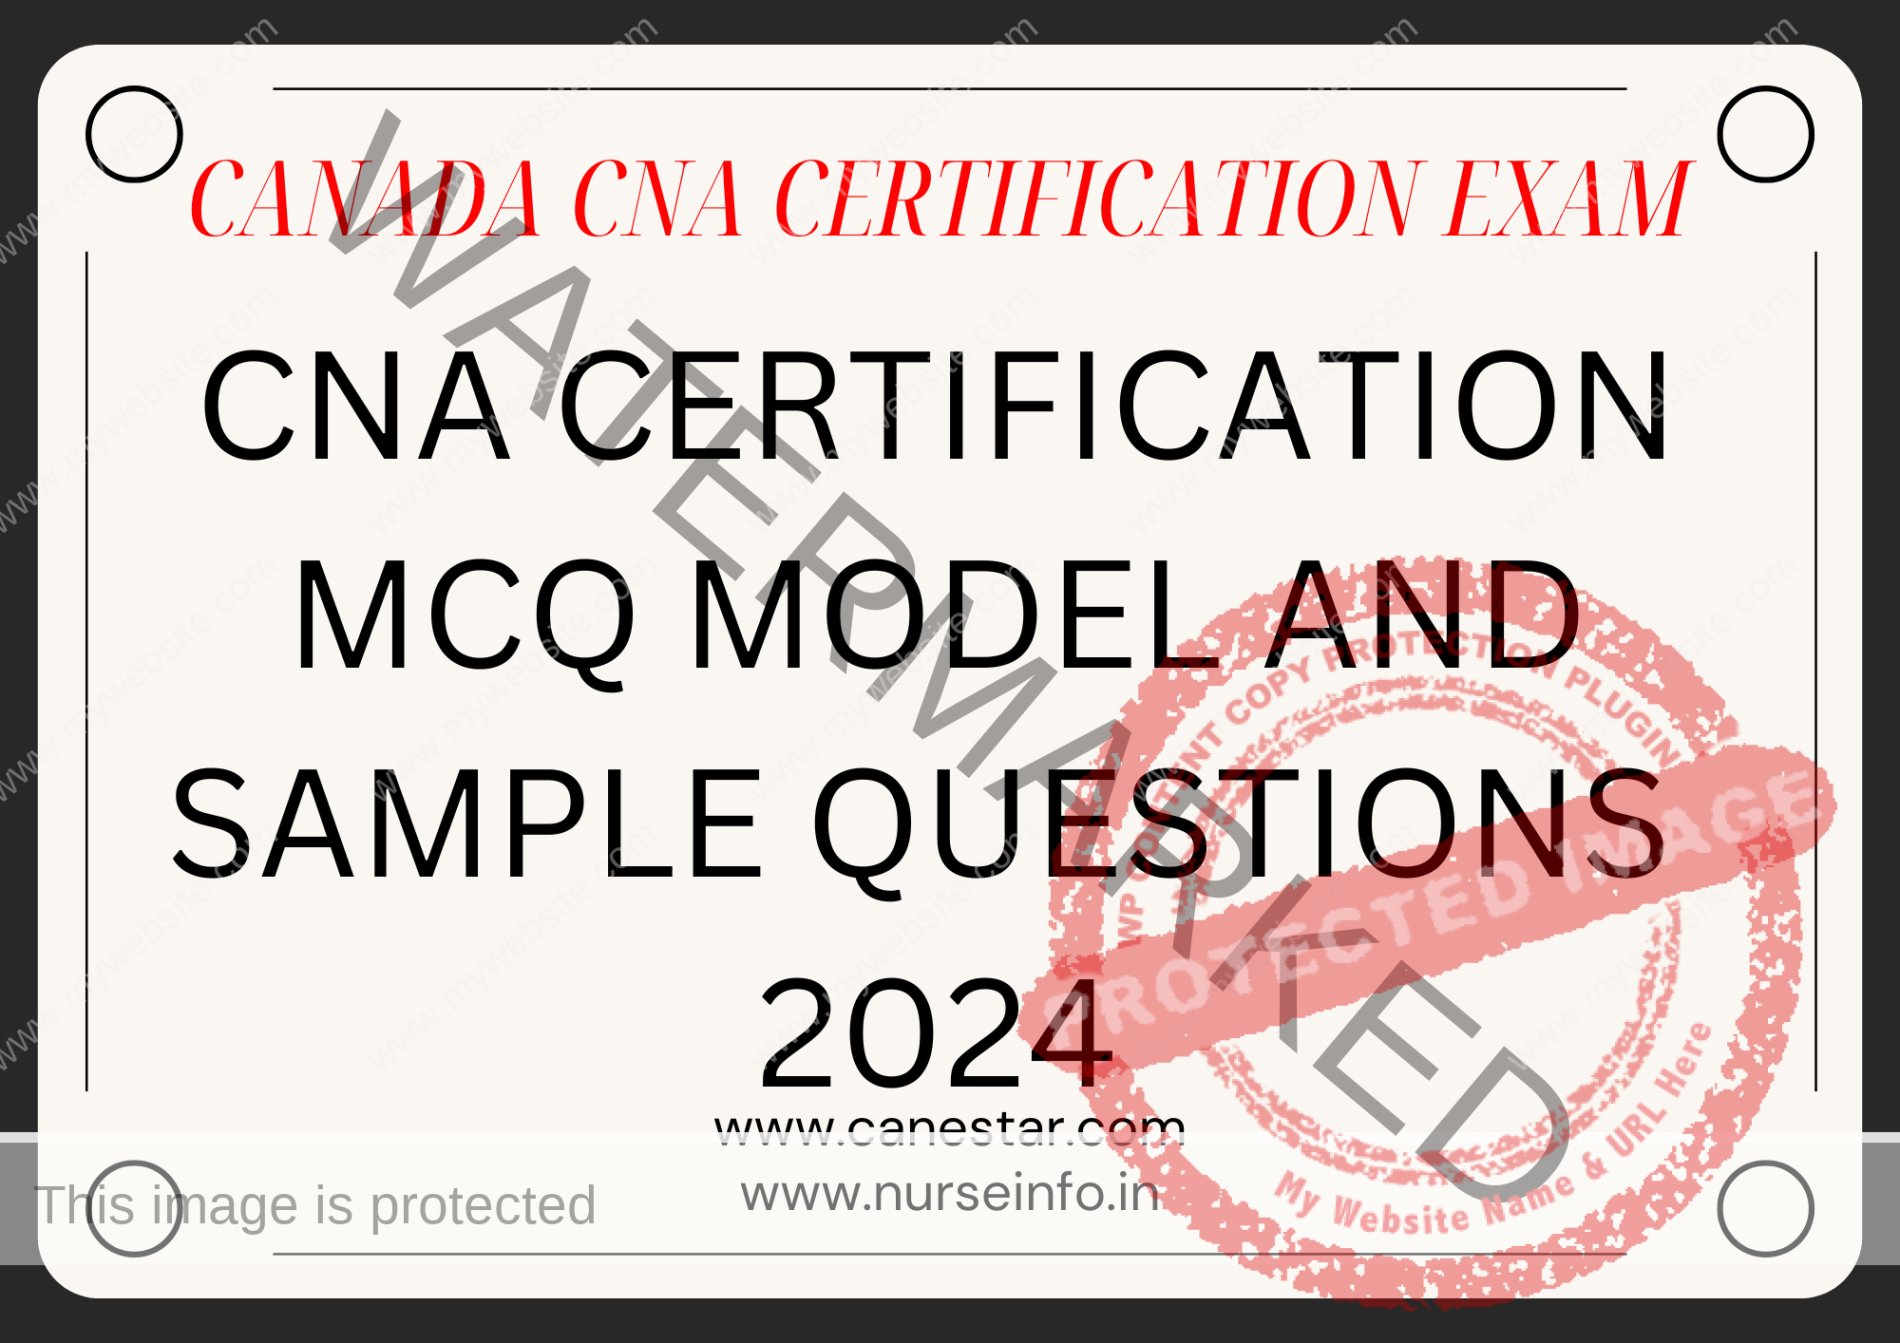 CANADA CNA CERTIFICATION EXAM CNA CERTIFICATION MCQ MODEL AND SAMPLE QUESTIONS